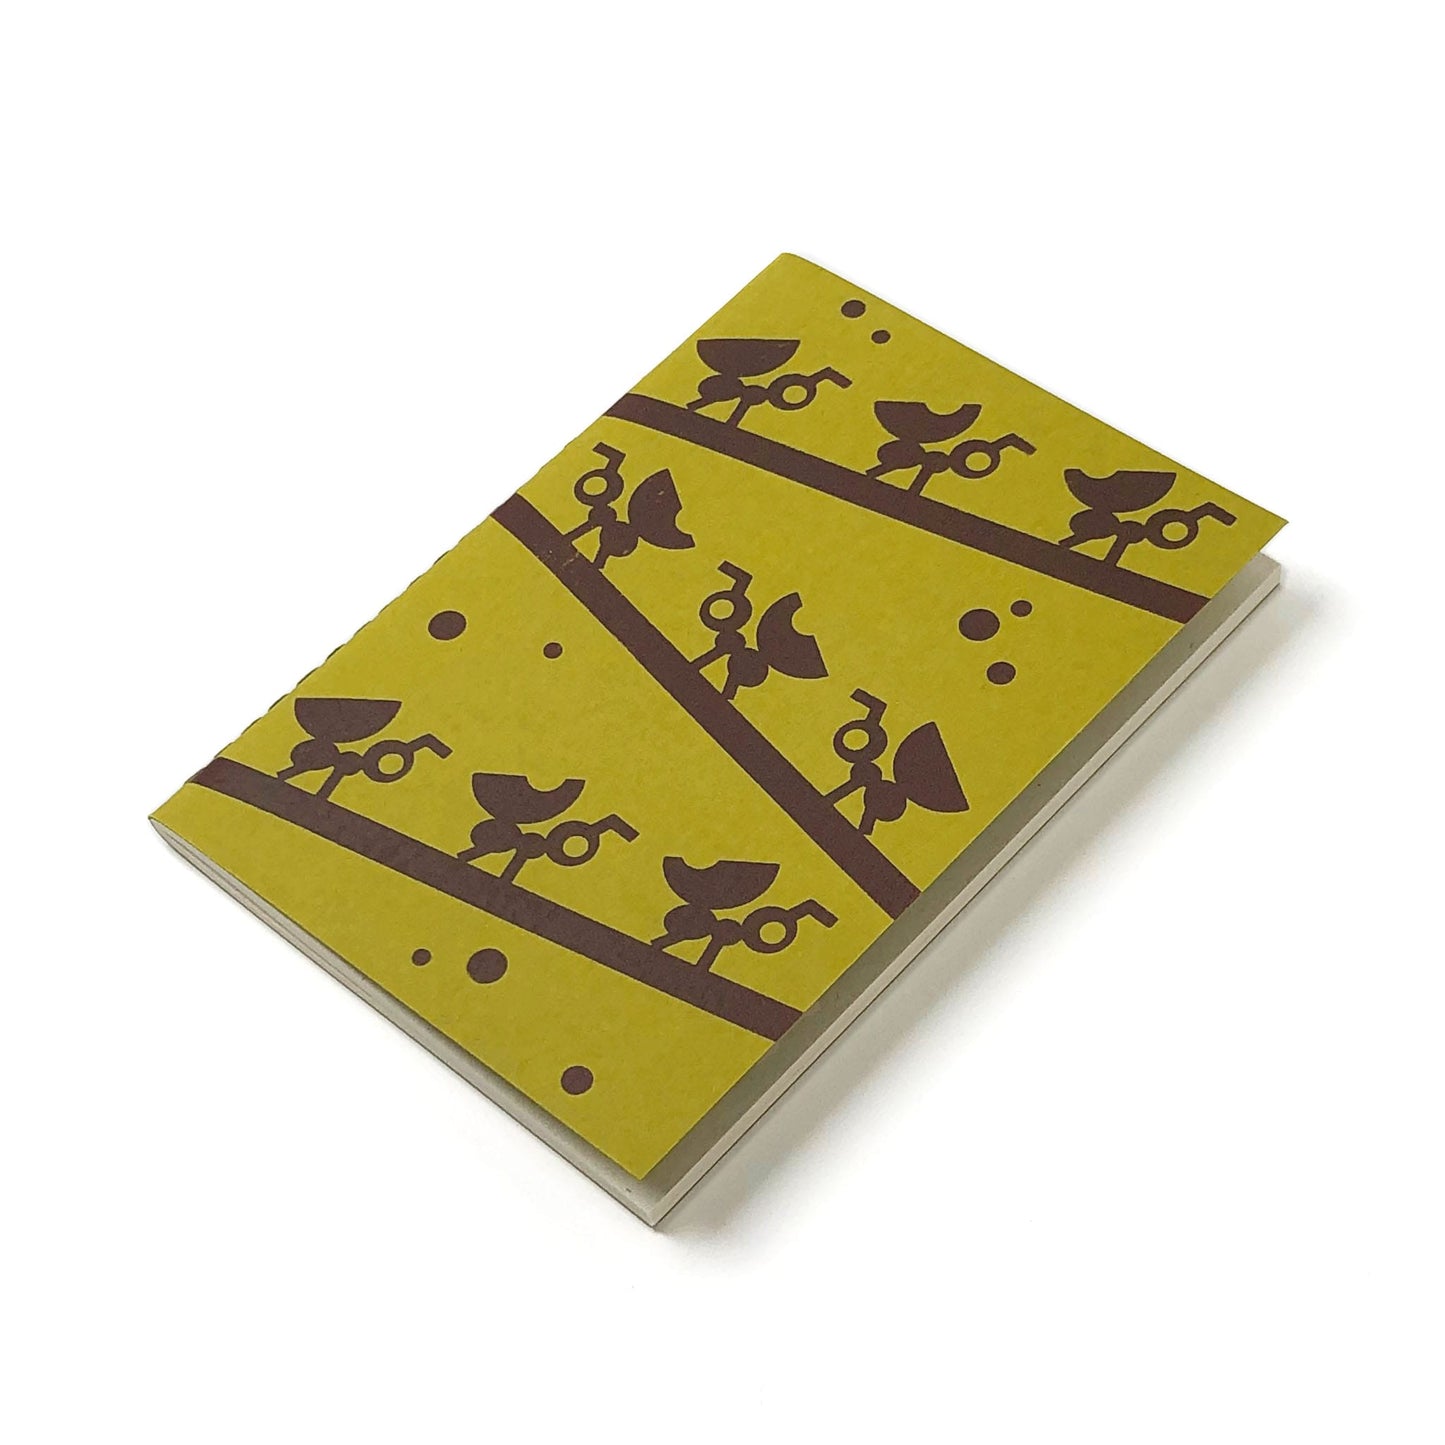 Green notebook with design of brown silhouetted ants, insects on branches.